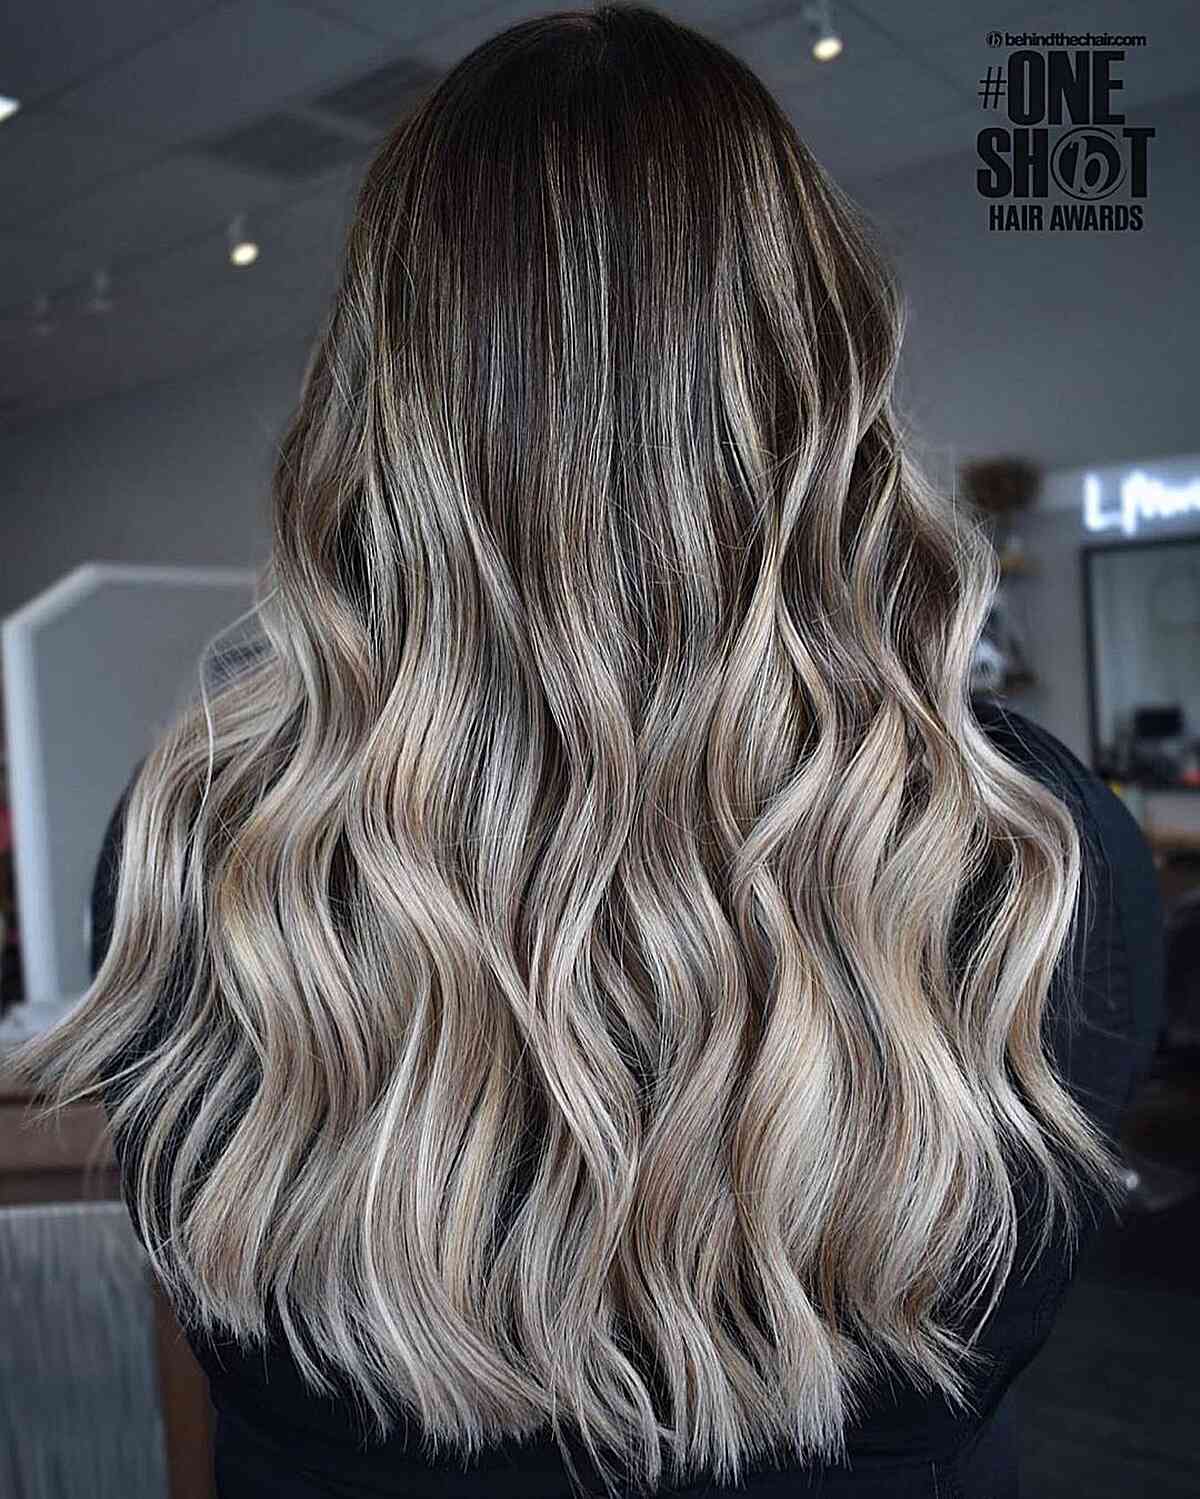 Light Blonde Balayage Ends with Dark Brown Roots